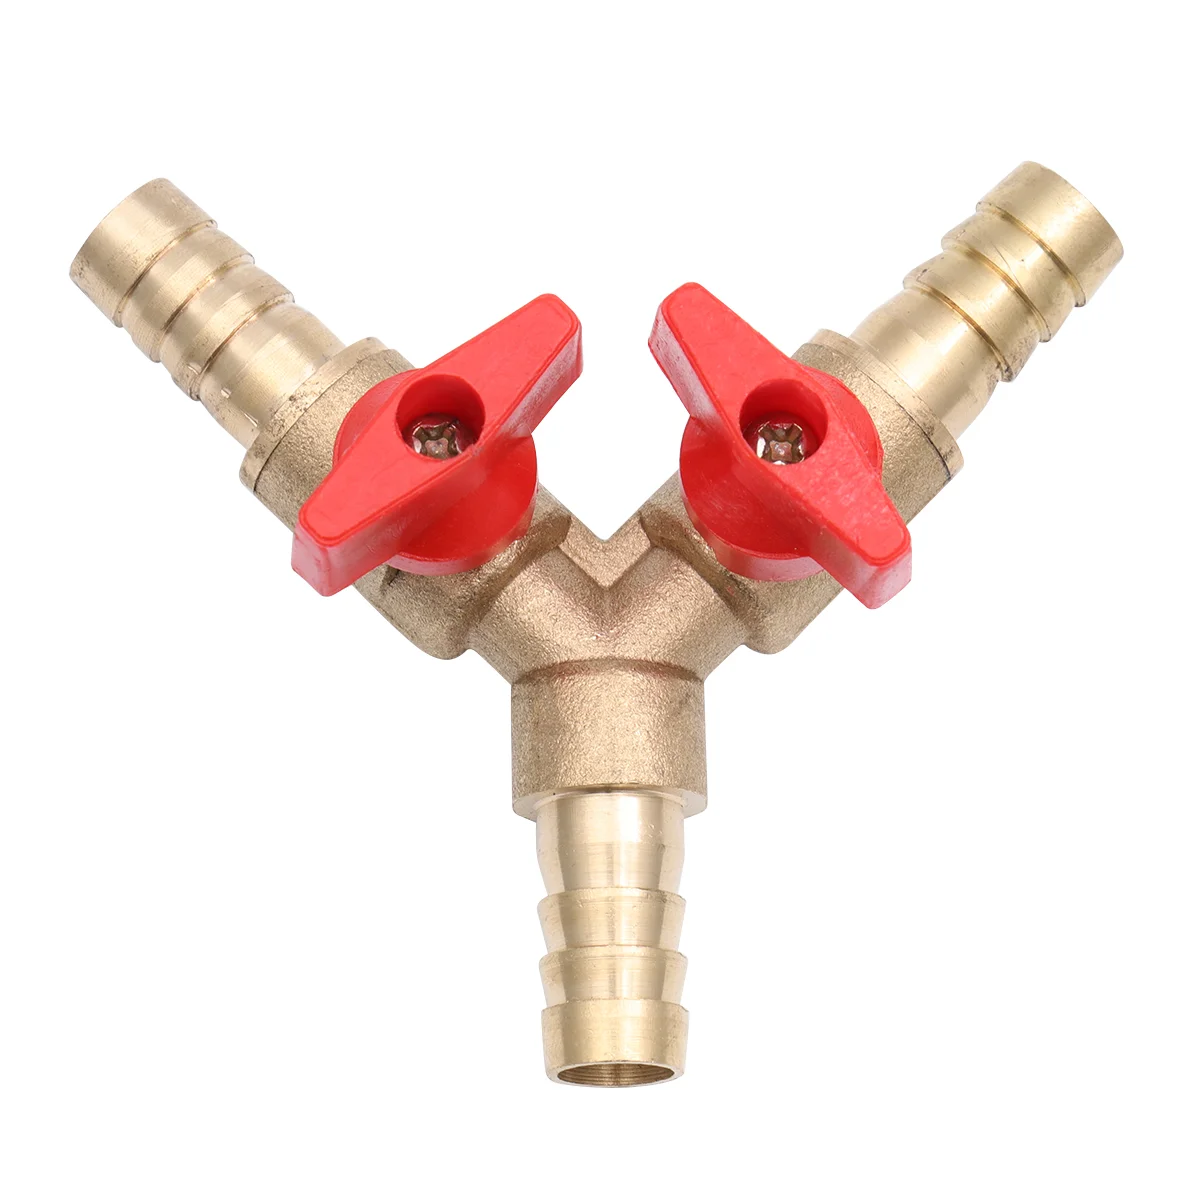 

3 Way Shut Off YShaped 3 Way Union Intersection Brass Shut Off Fitting ( Copper 10mm Golden Red )